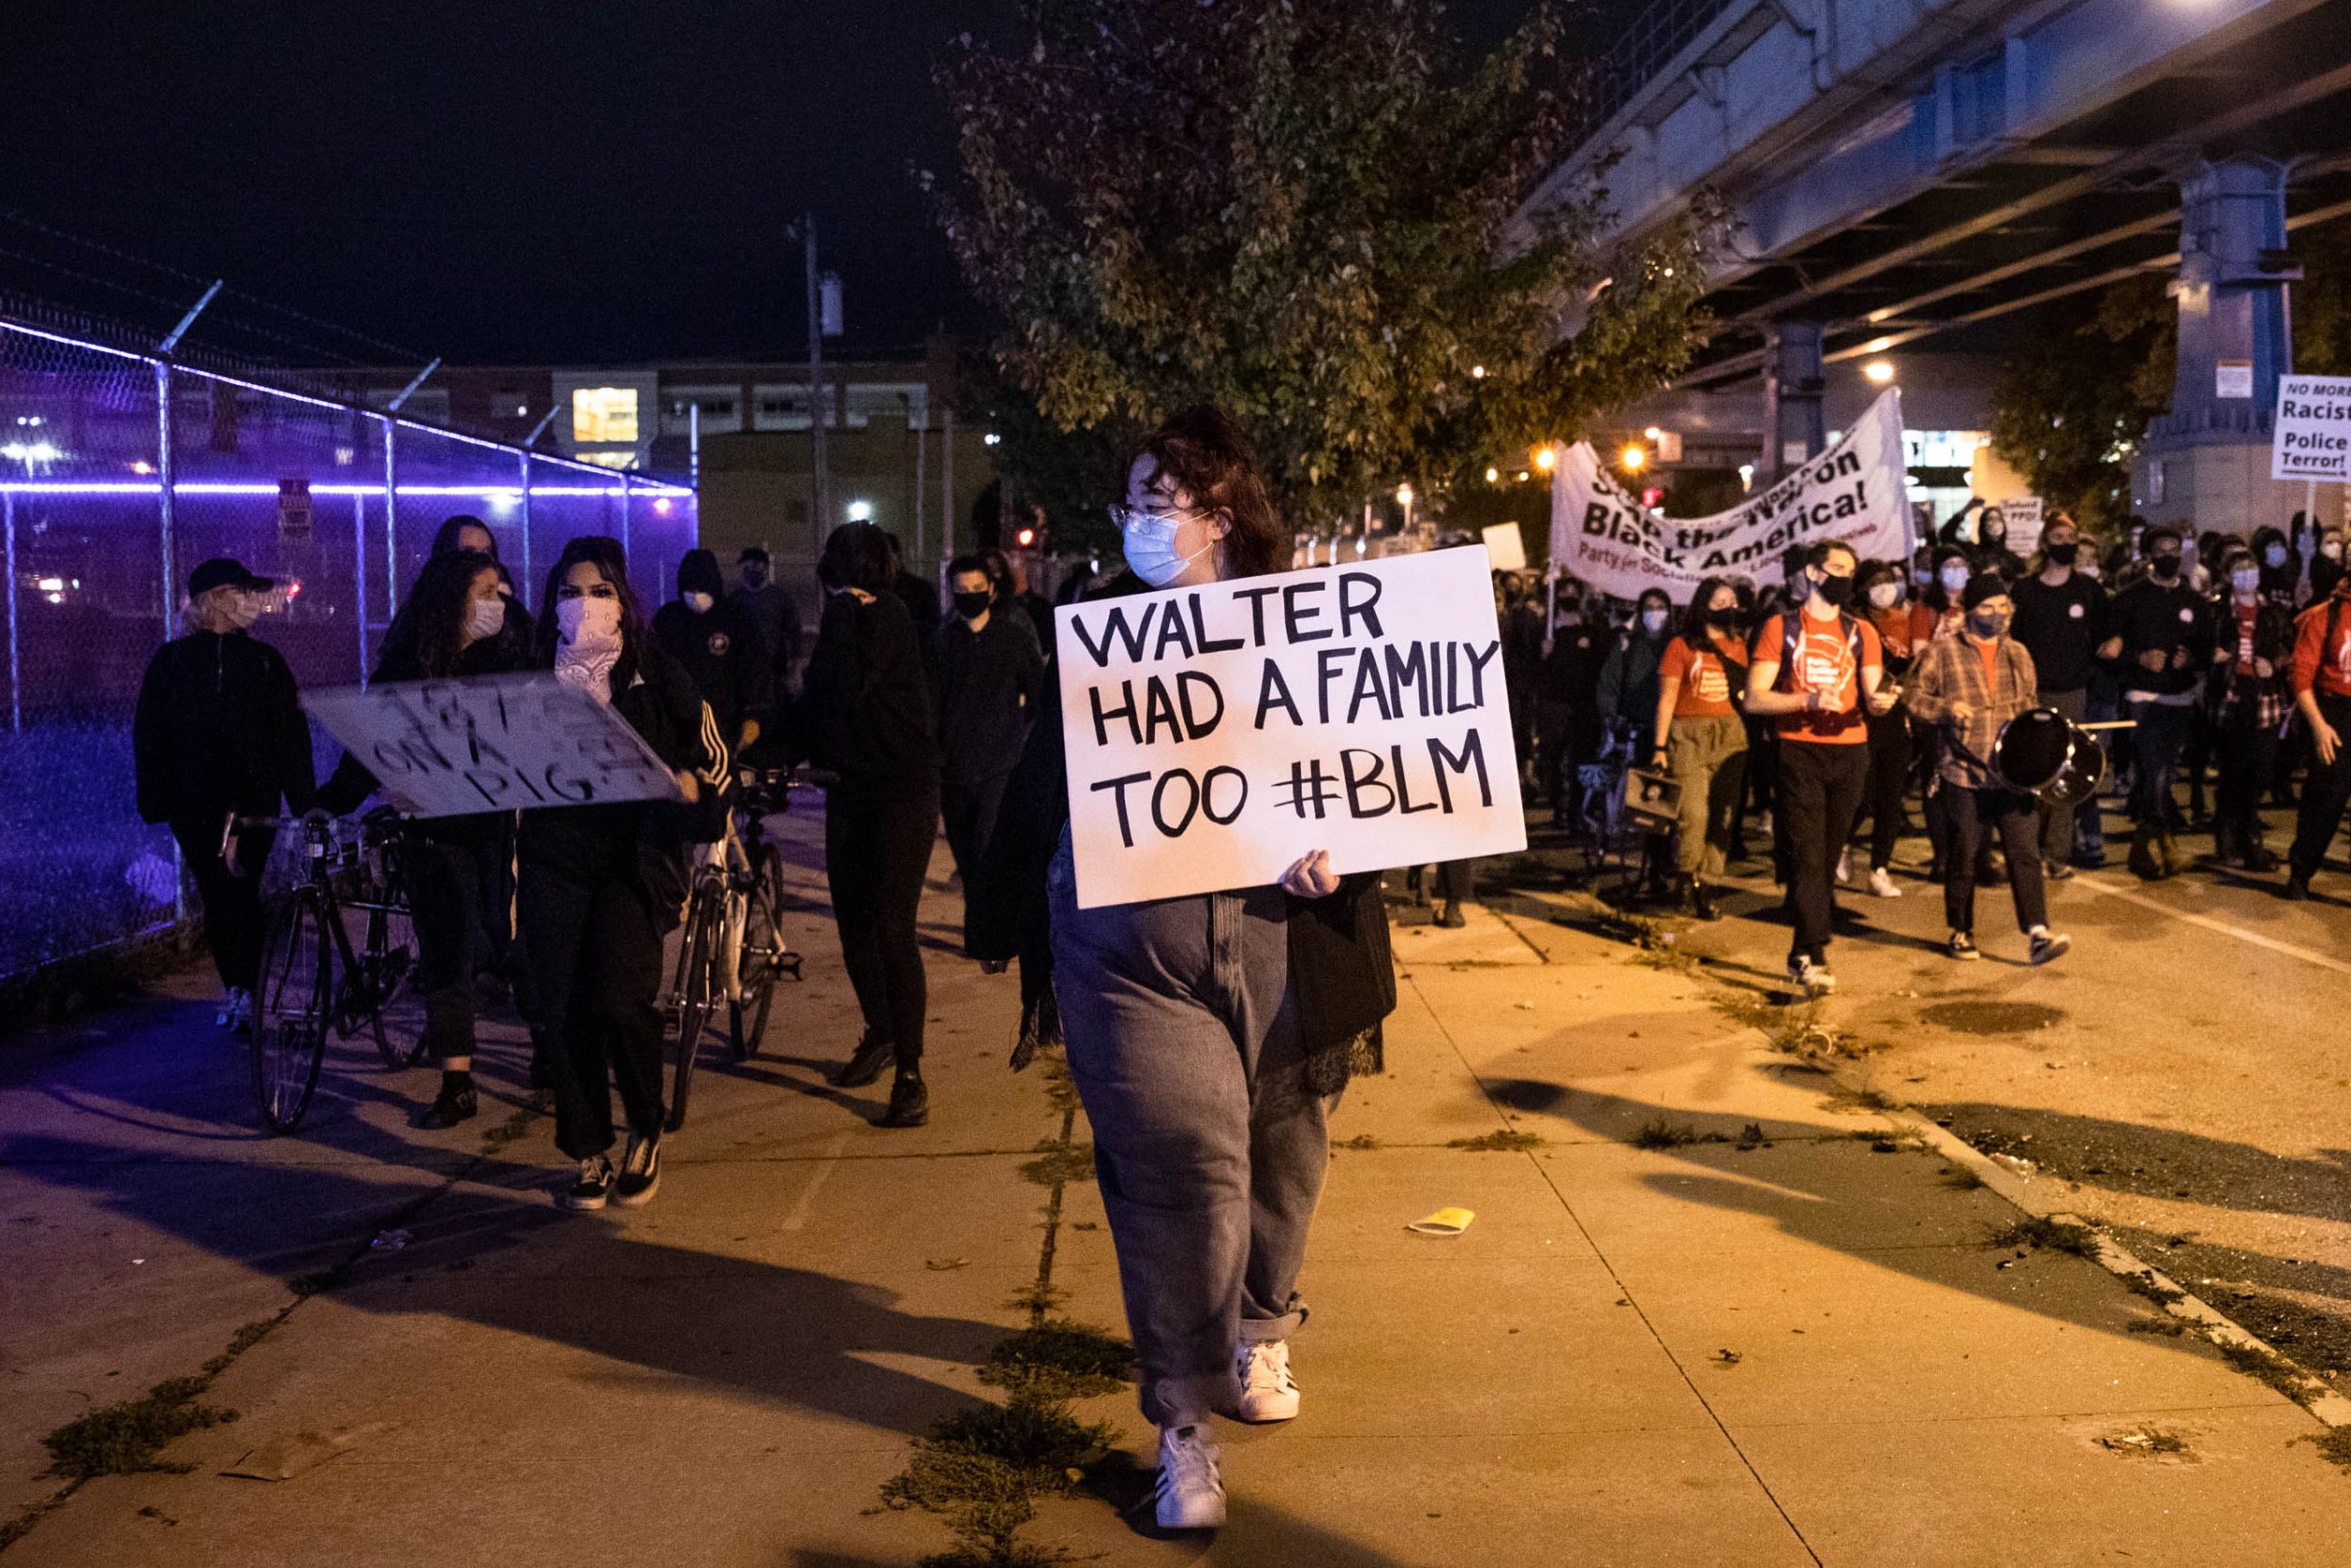 Philadelphia reimposes curfew after unrest over police killing of Walter Wallace